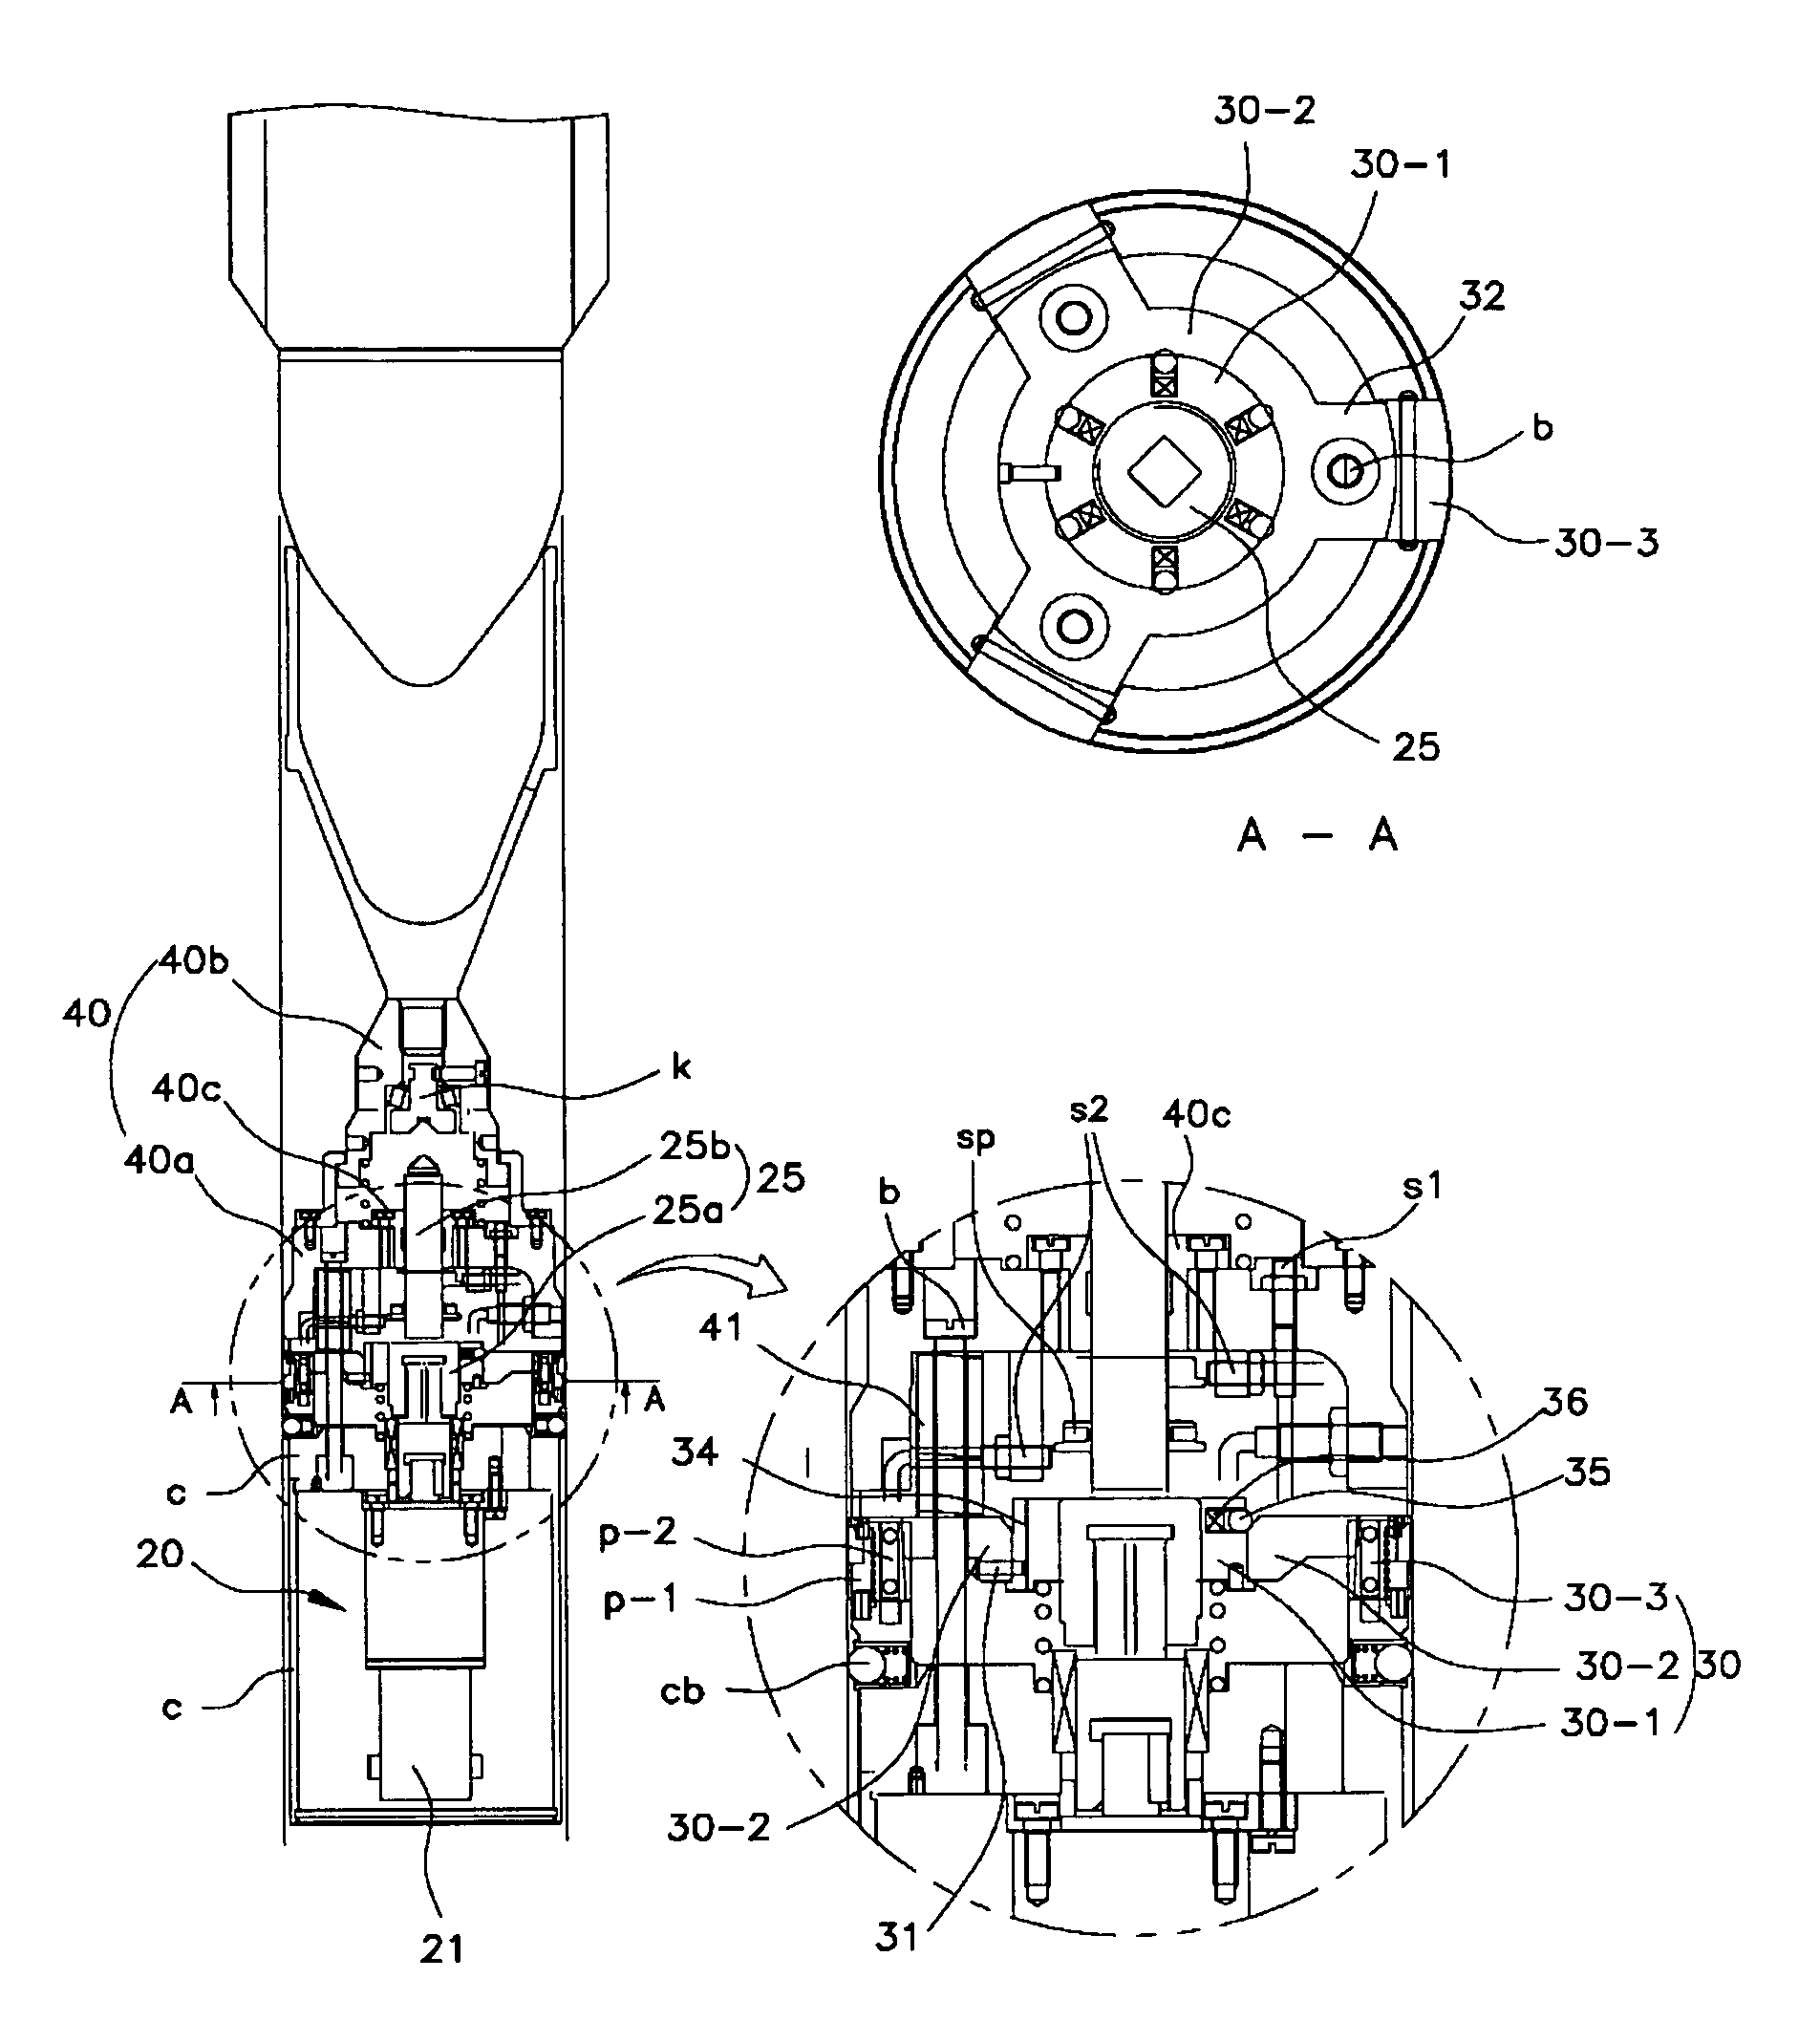 Apparatus for removing dud